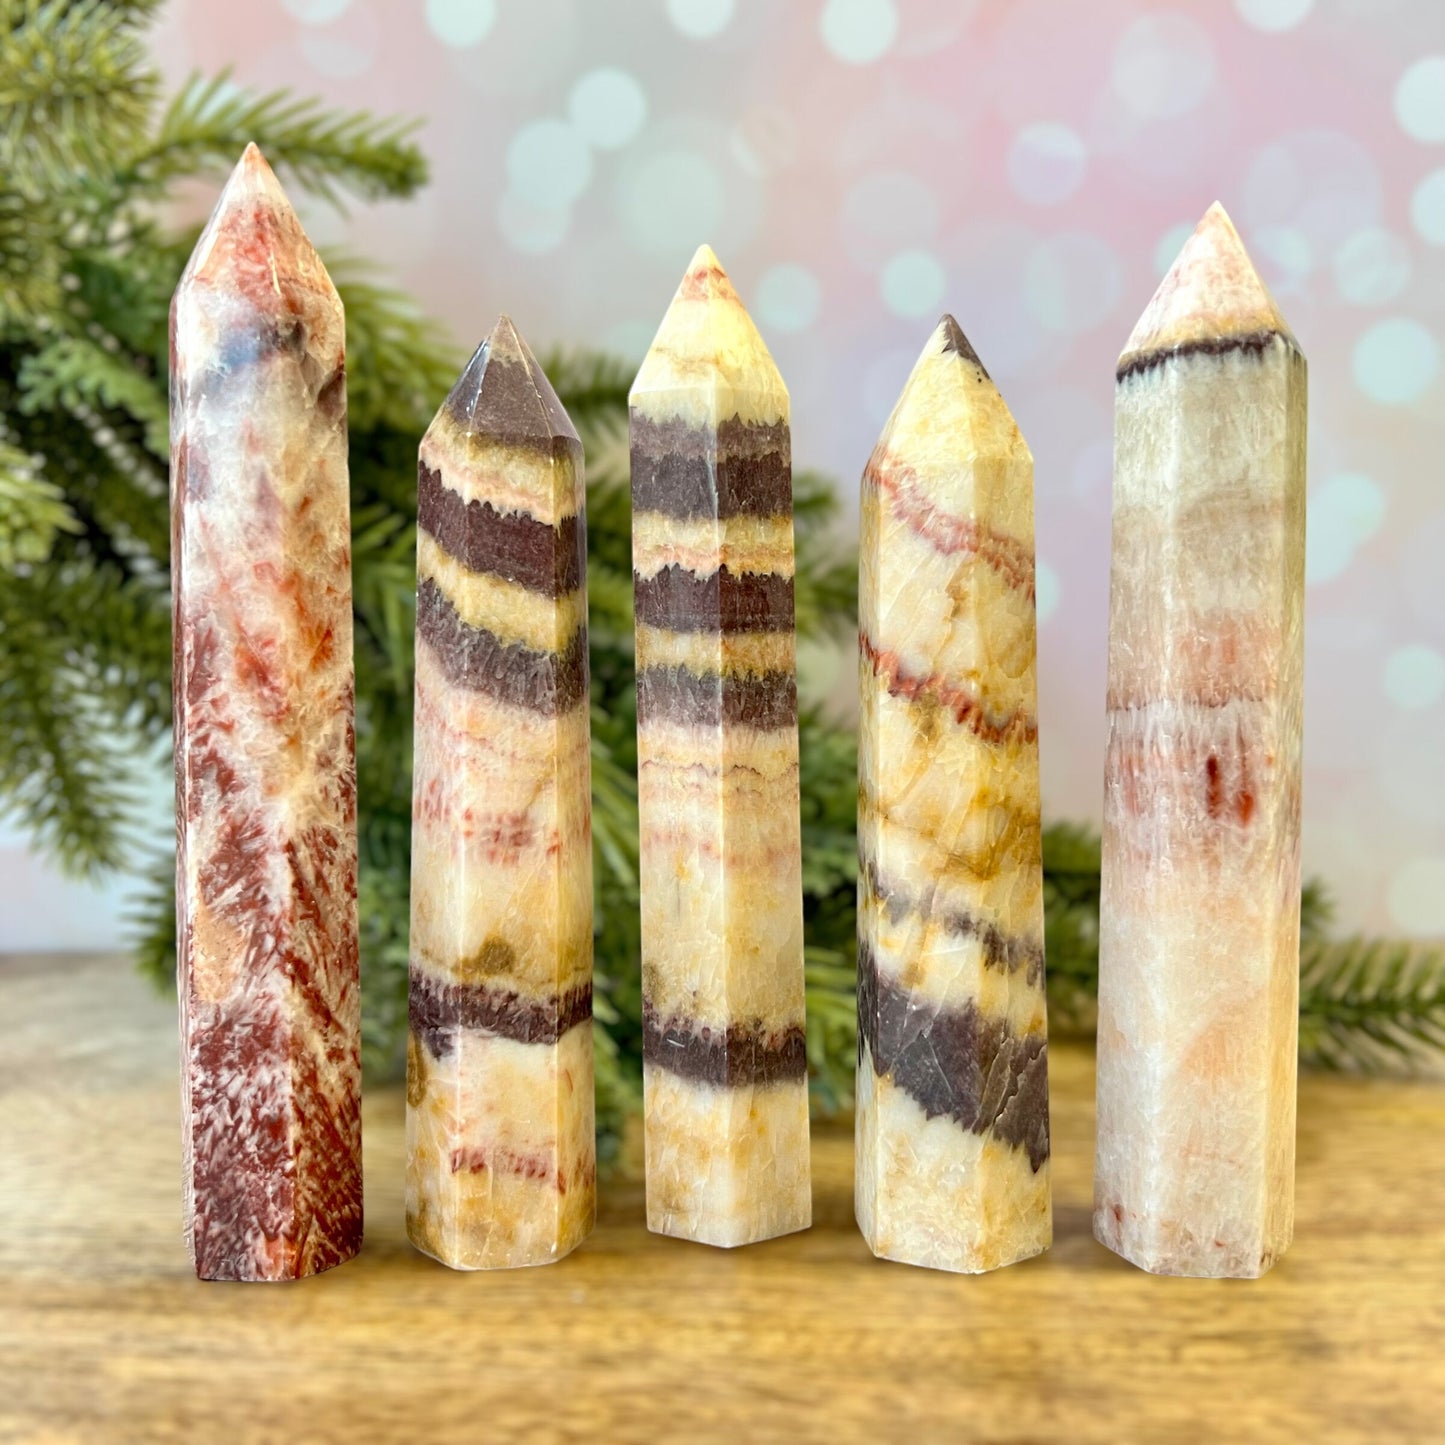 Red Banded Calcite Crystal Tower - You get one